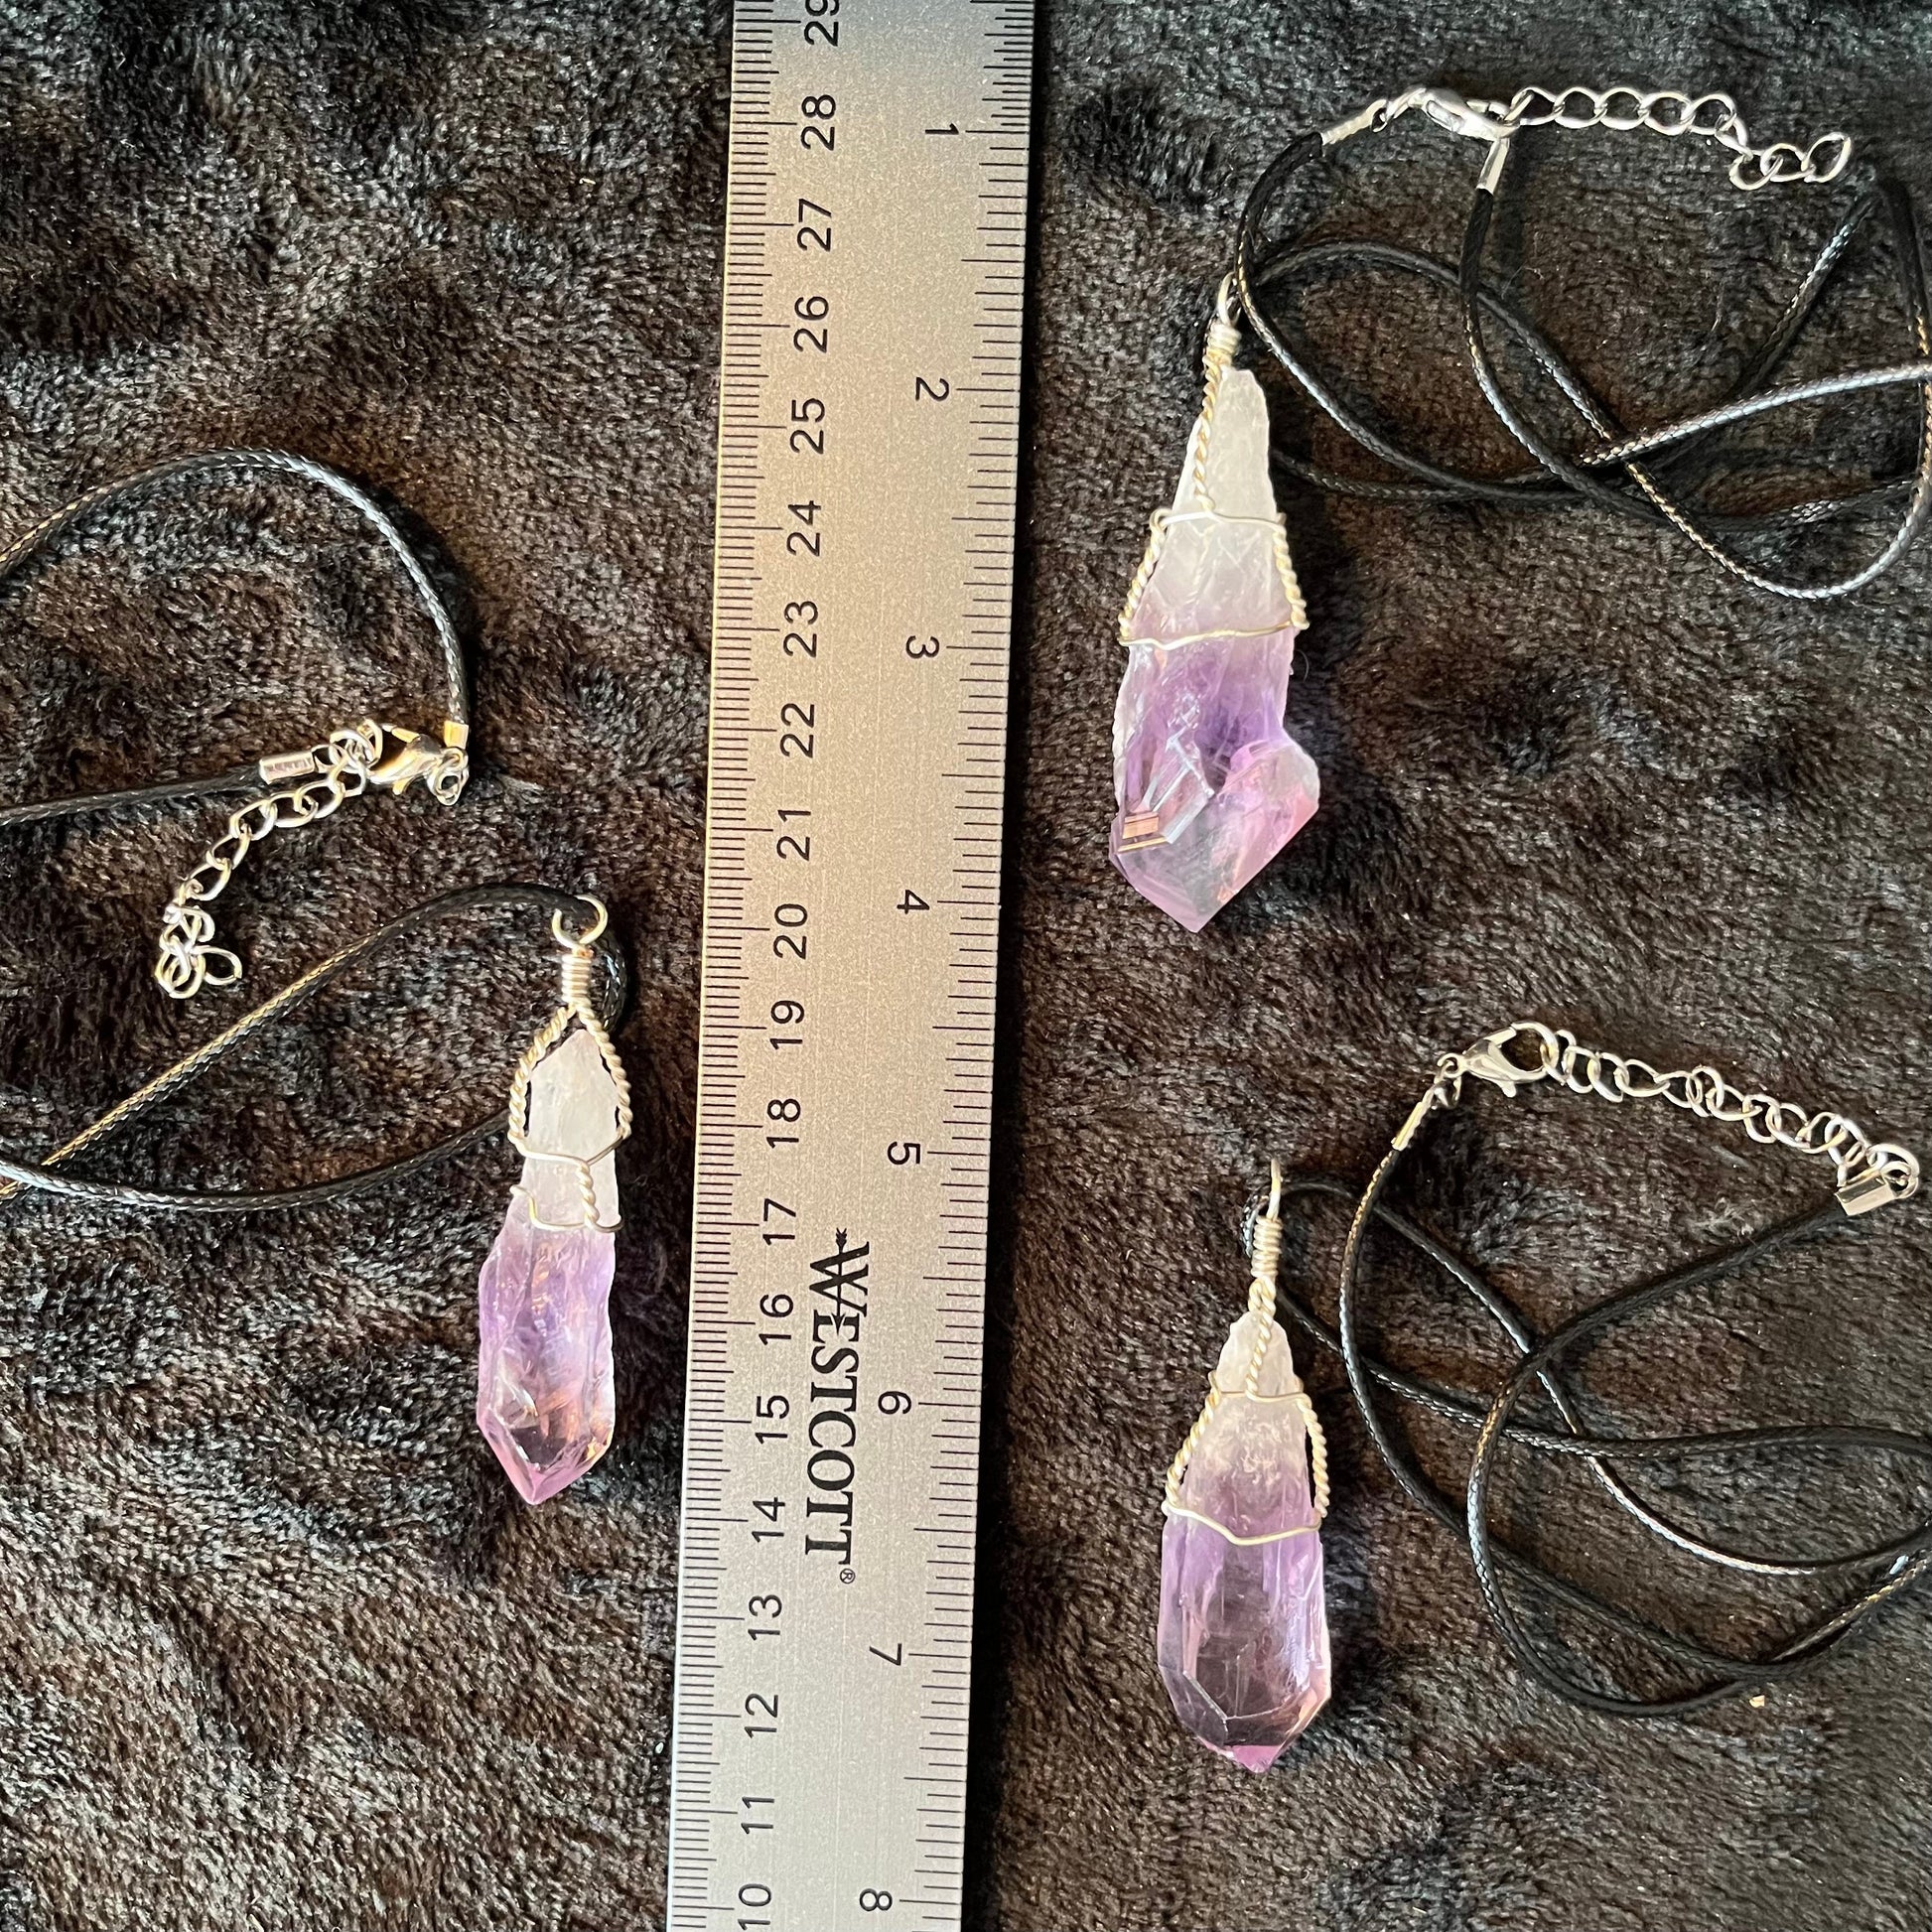 3 dragon's tooth amethyst, silver wire wrapped necklace, displayed next to a ruler to show size.  pendants are 2 3/4 inches to 3 1/4 inches long attatched to adjustable cords